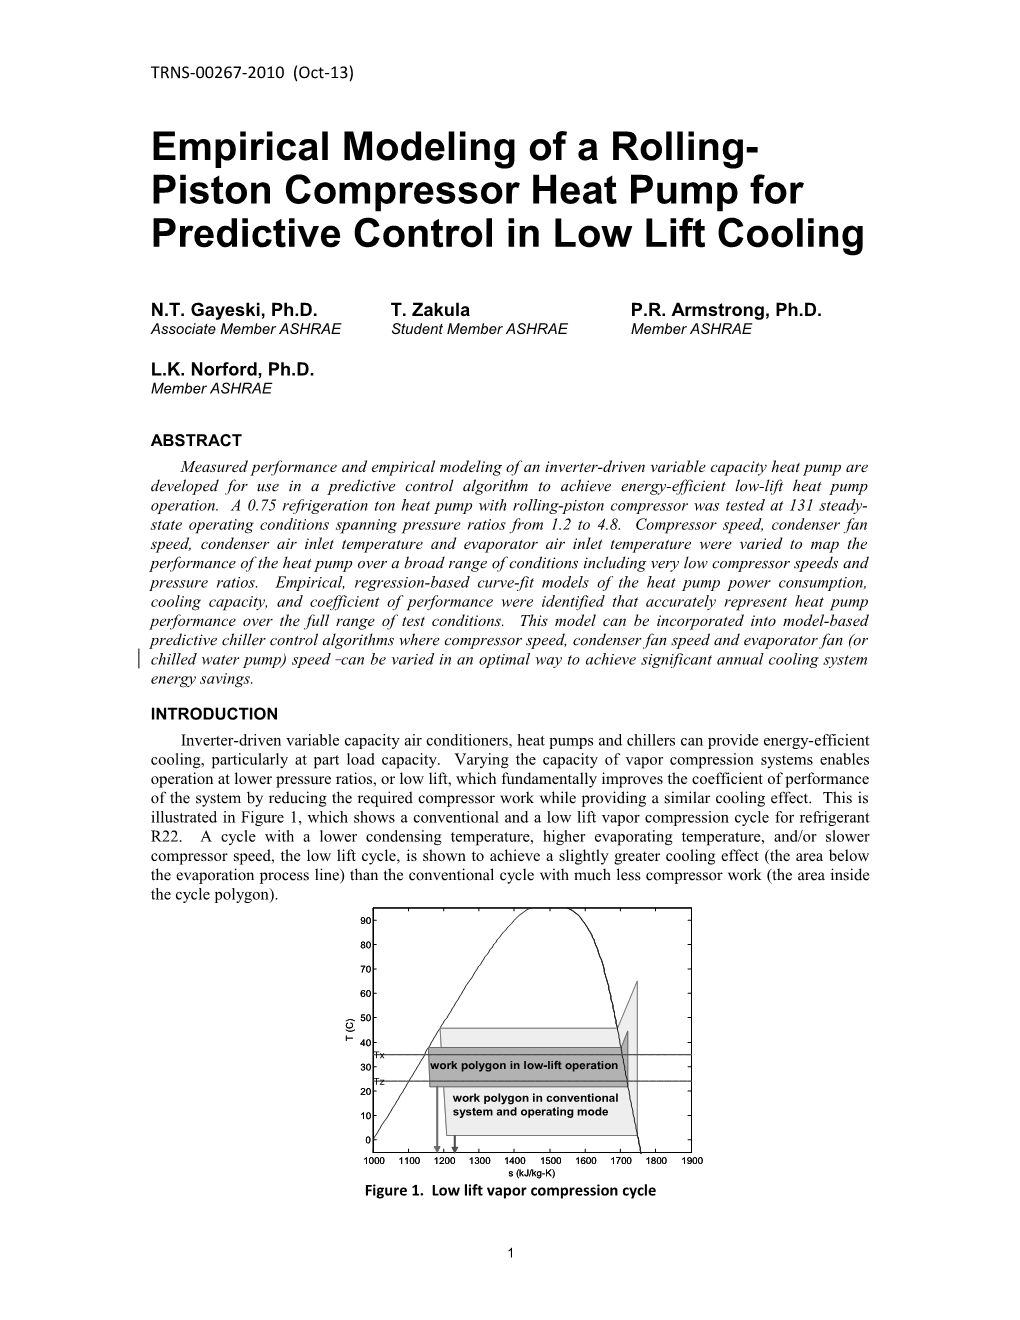 Empirical Modeling of a Rolling-Piston Compressor Heat Pump for Predictive Control In